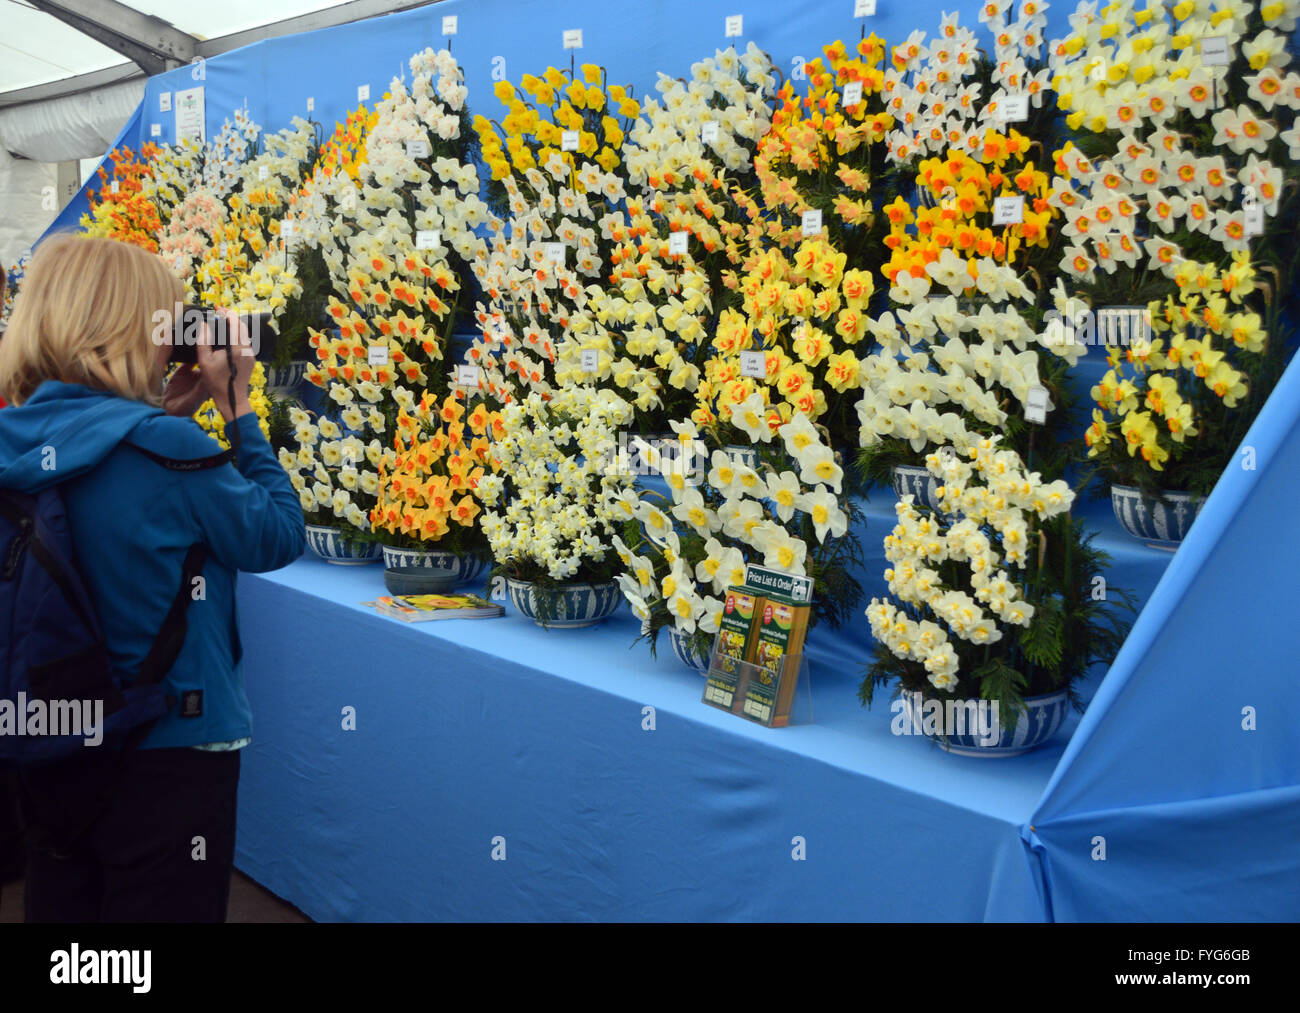 Lady Taking Photos of Daffodils on Display in the Plant Pavilion at the Harrogate Spring Flower Show. Yorkshire UK. Stock Photo